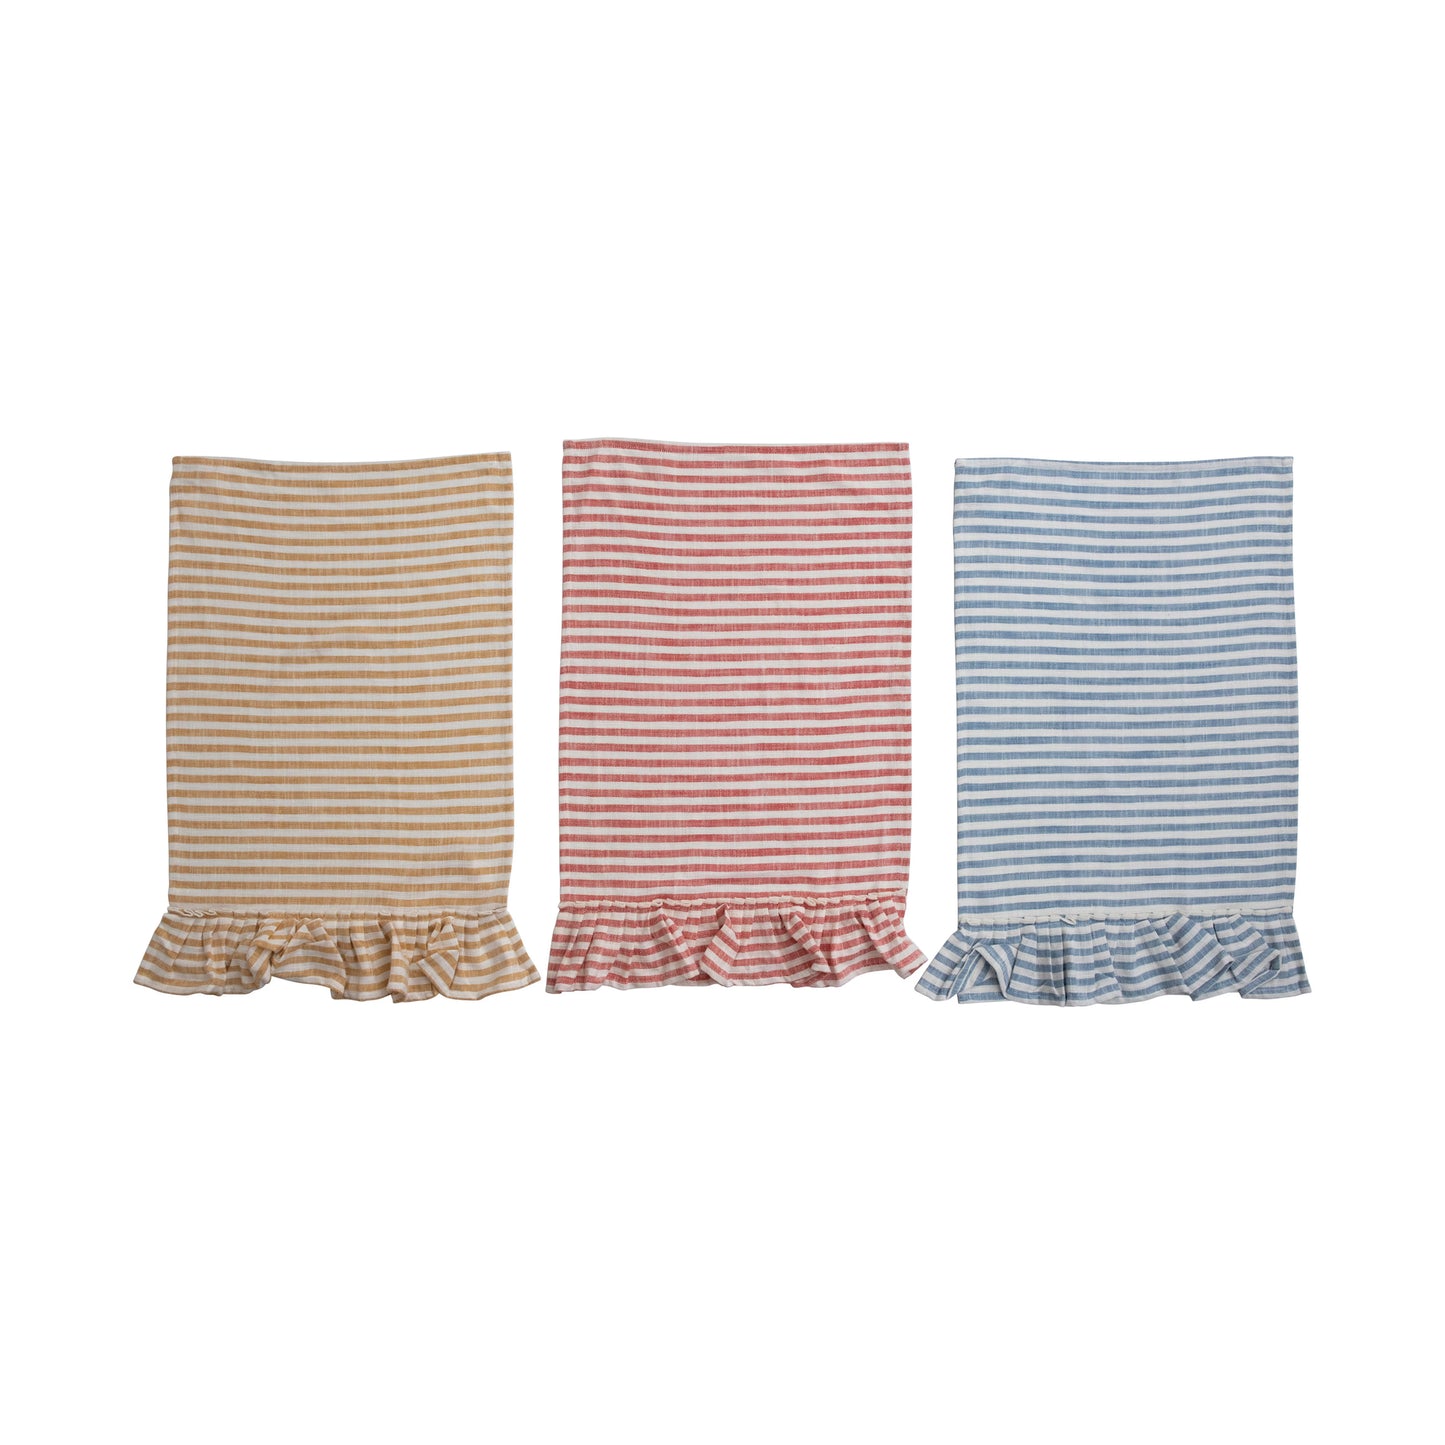 three different colored striped cotton tea towels with ruffles folded on a white background